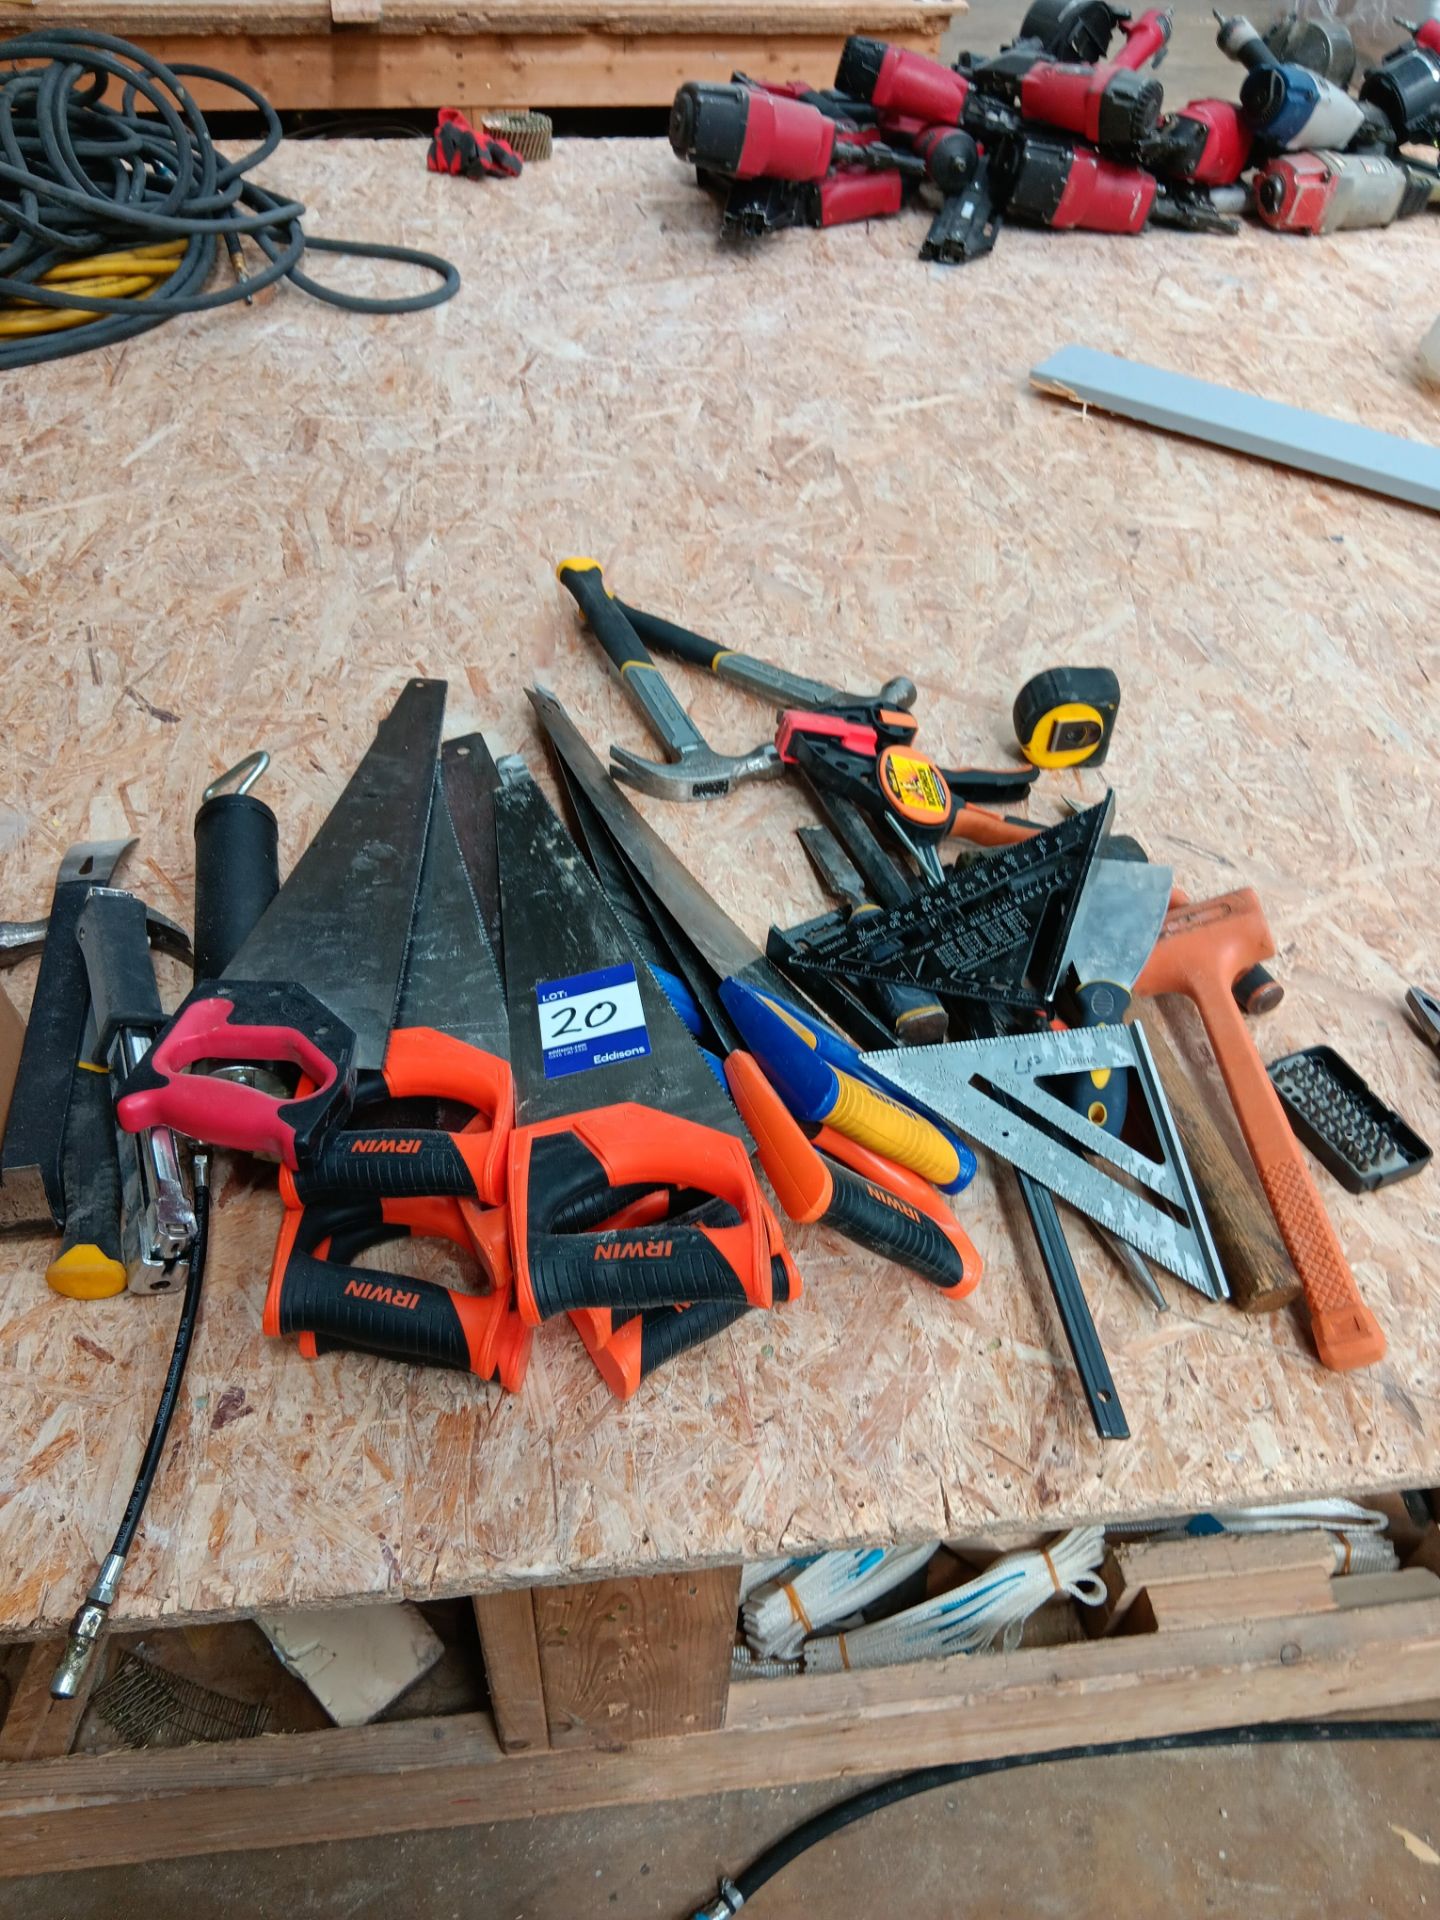 Quantity of hand saws & hand tools